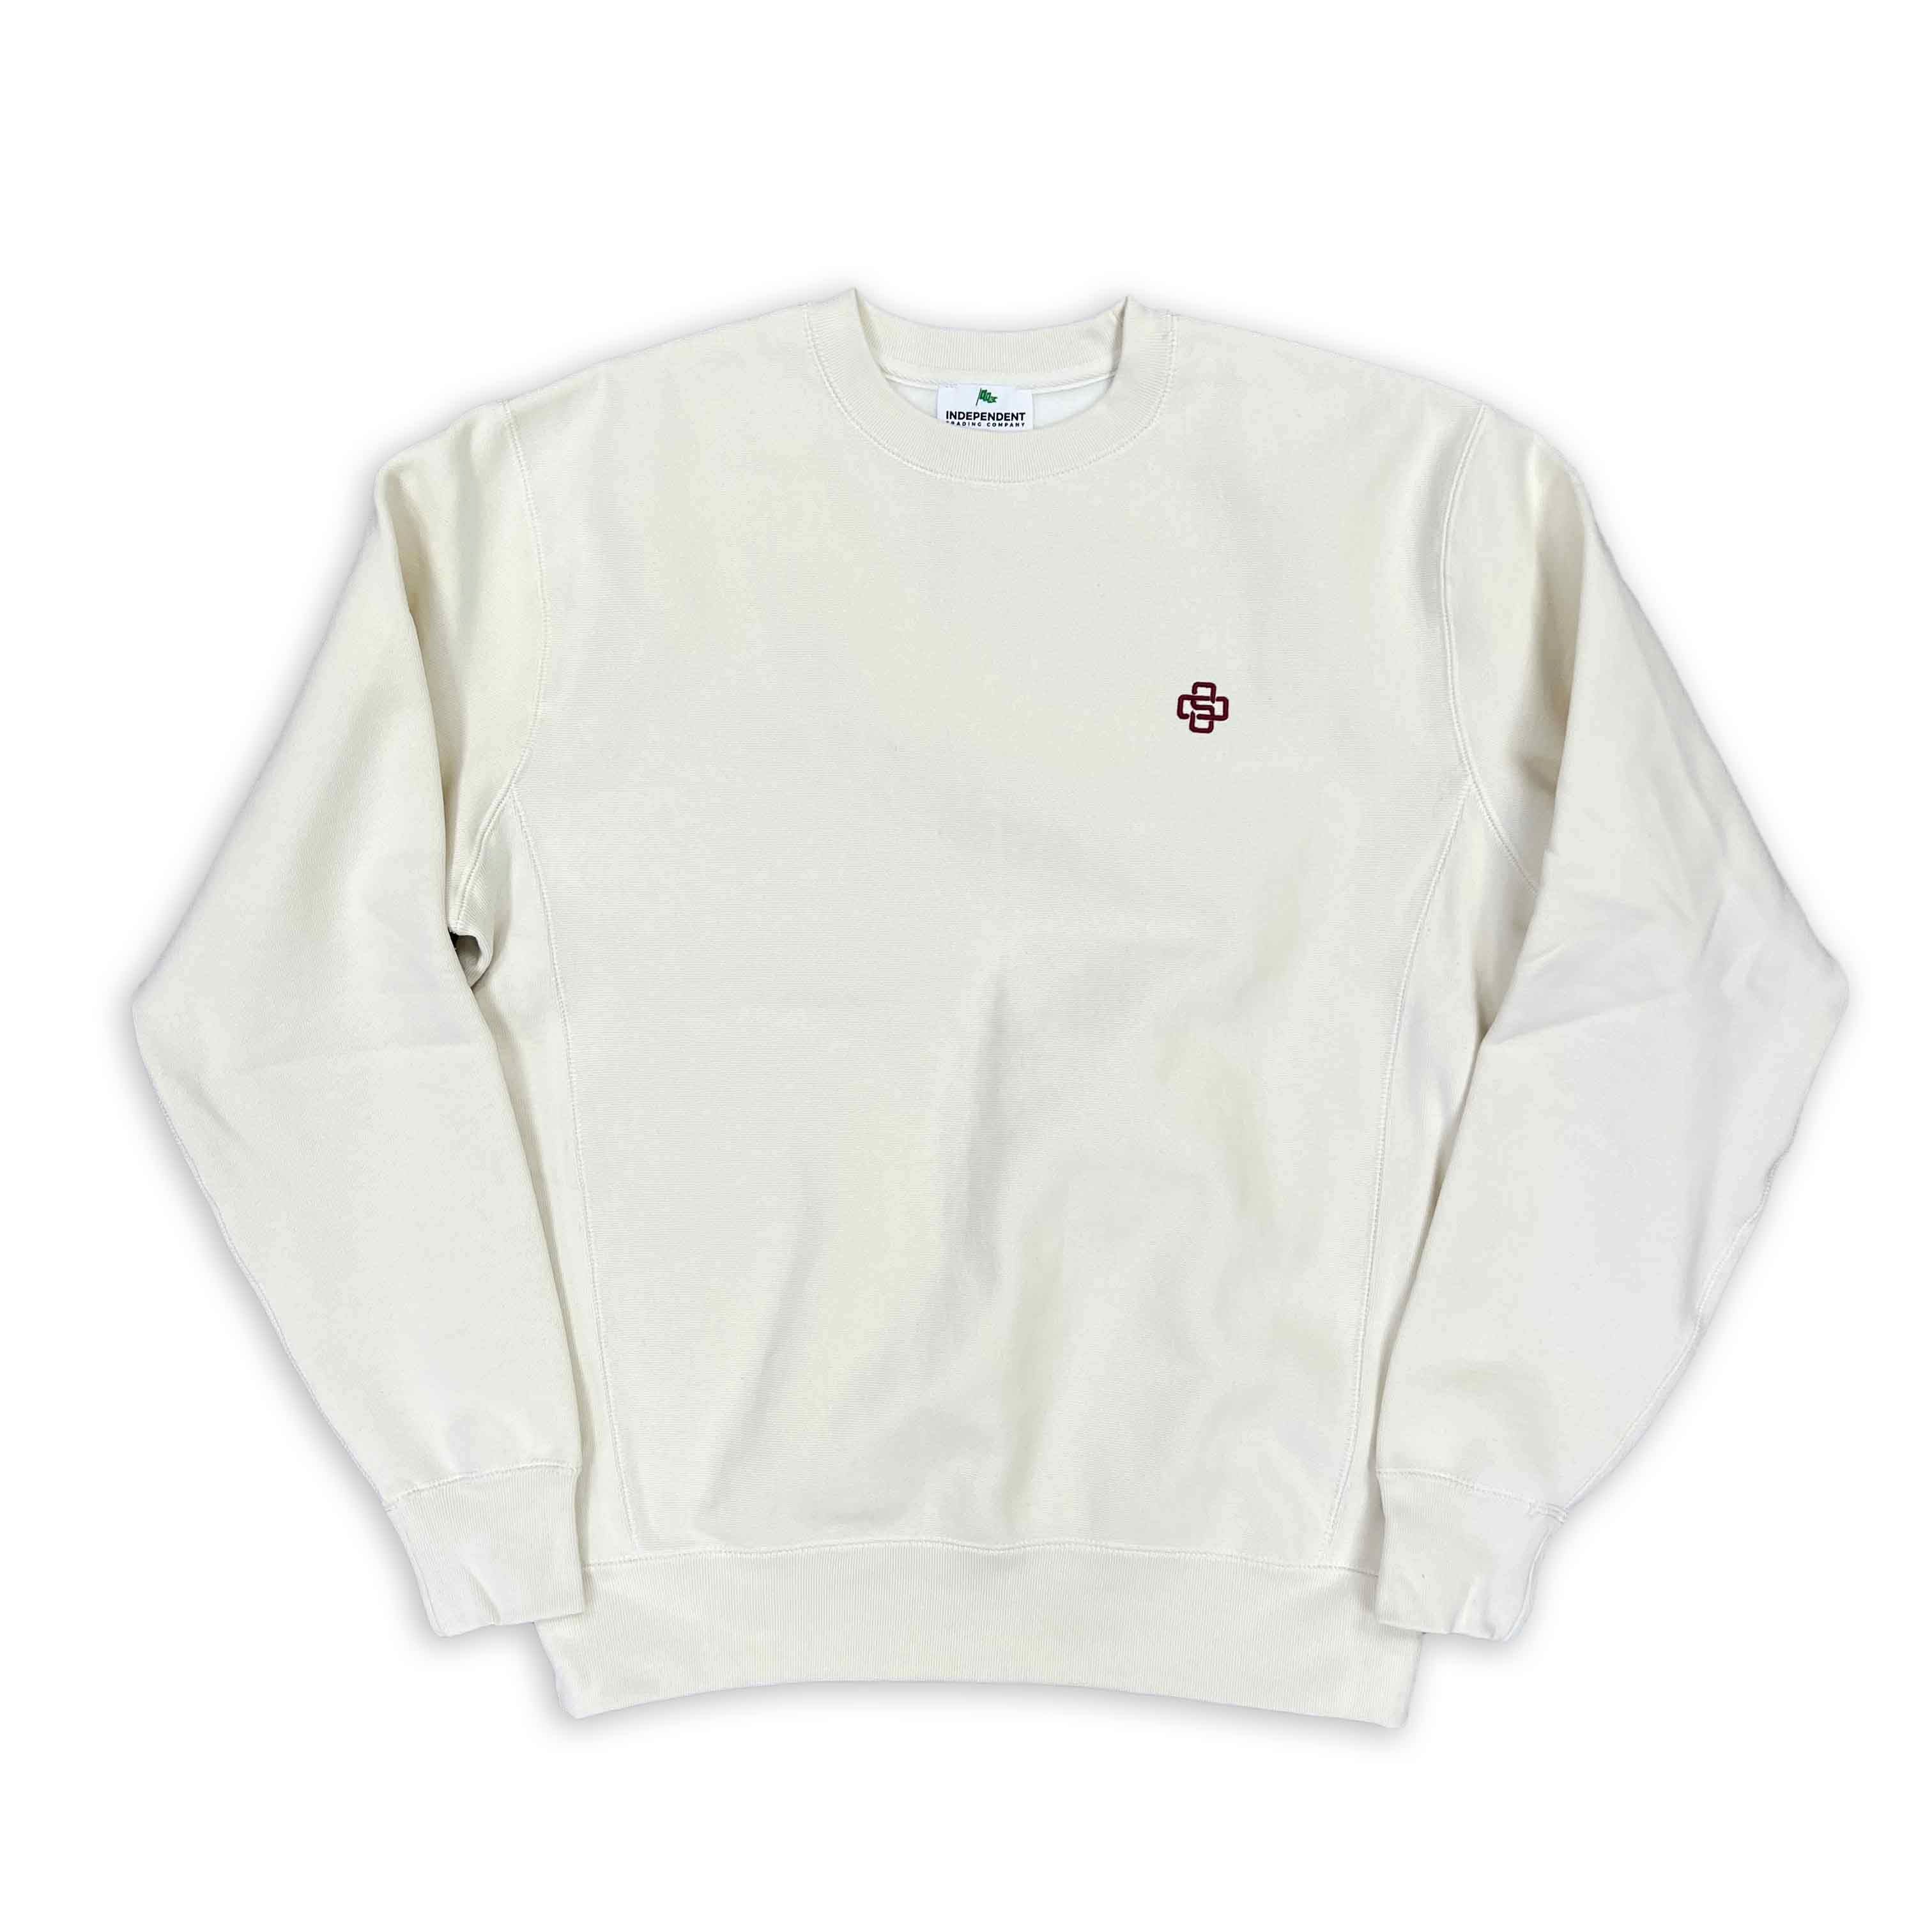 Soled Out Crewneck Sweater "SO+" Cream New Size L